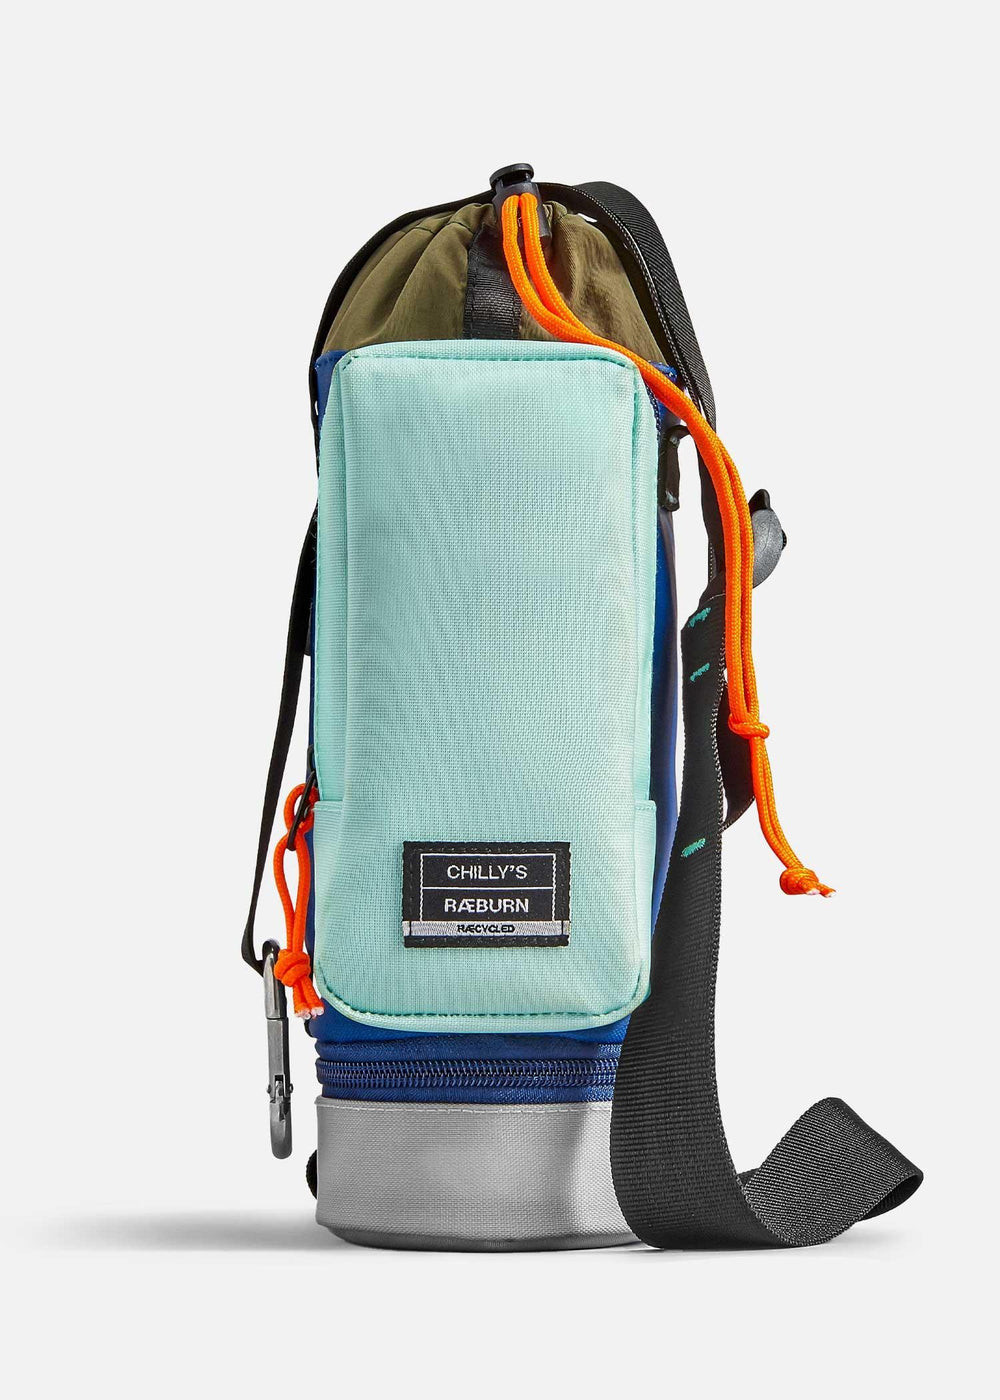 Raeburn creates lightweight bags from old North Face tents.